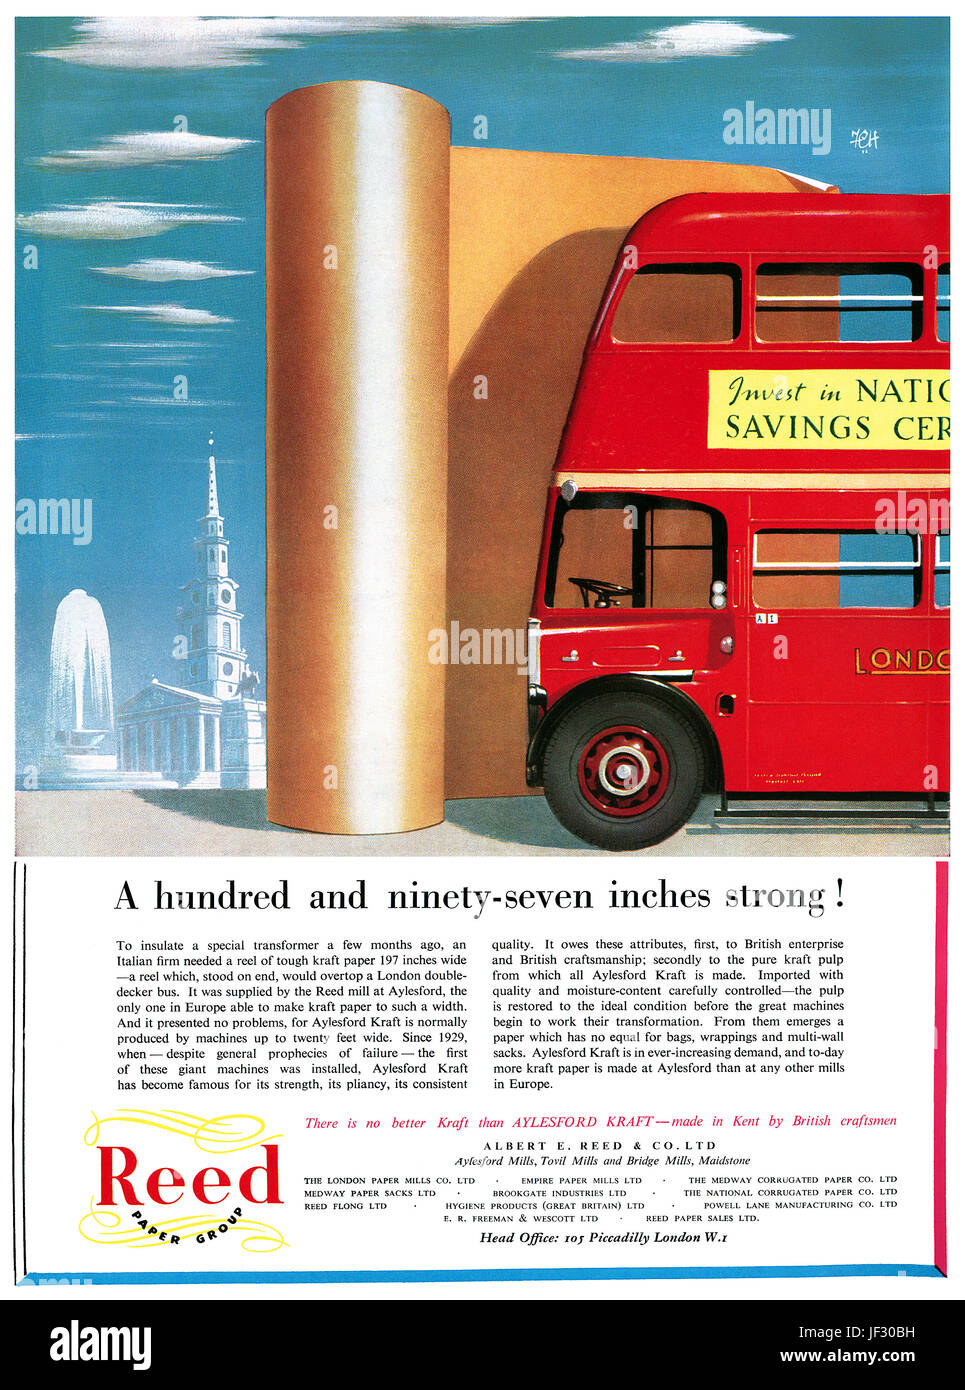 1954 British advertisement for Reed Paper. Stock Photo